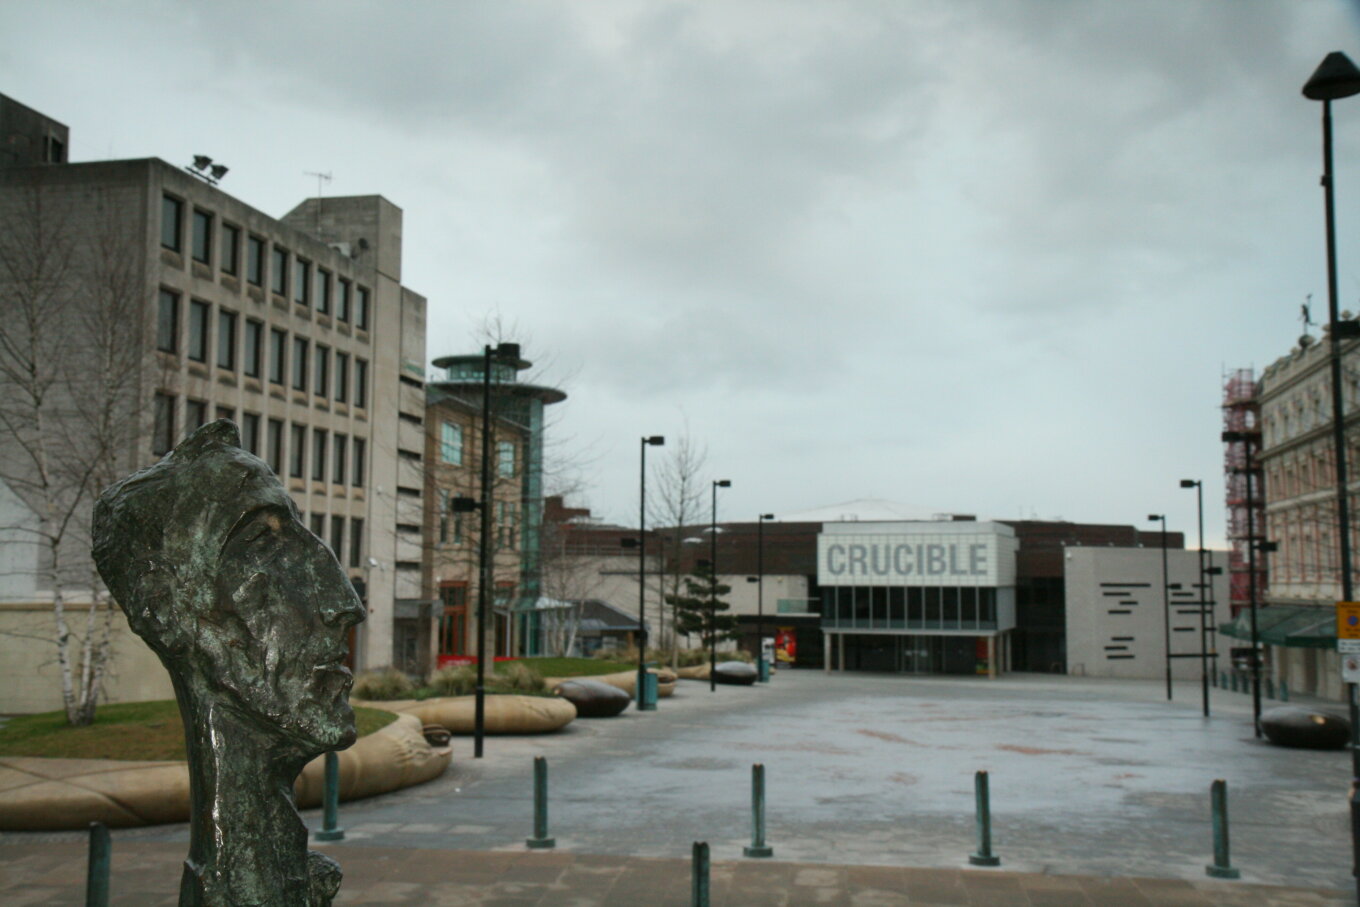 The square outside the Crucible Theatre